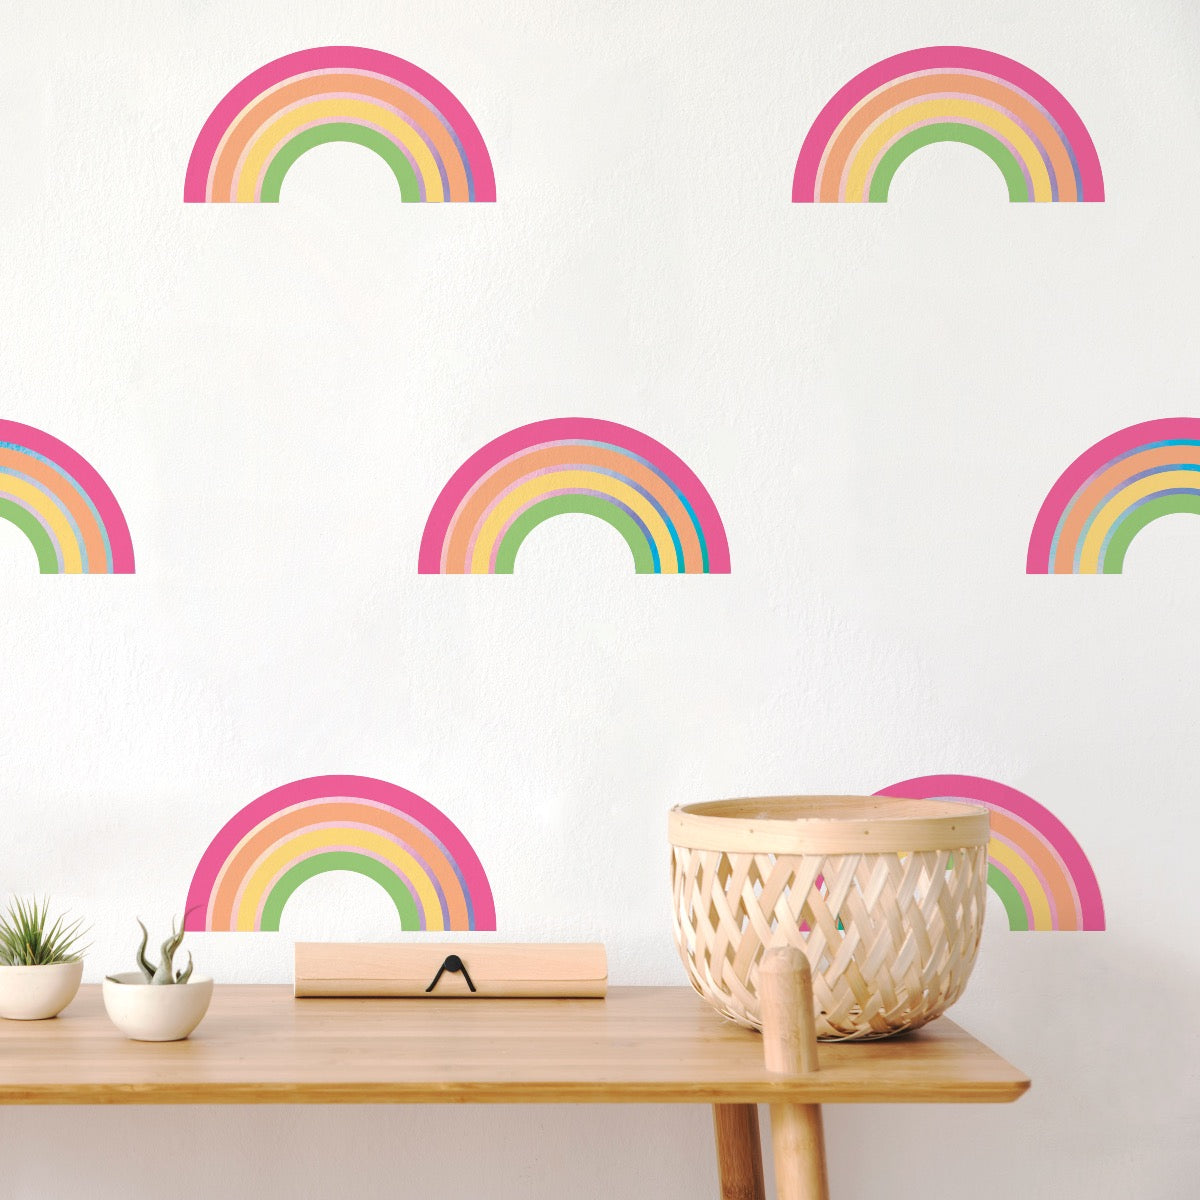 An up close look at Rainbow wall decals from Tempaper on the wall behind a side table.